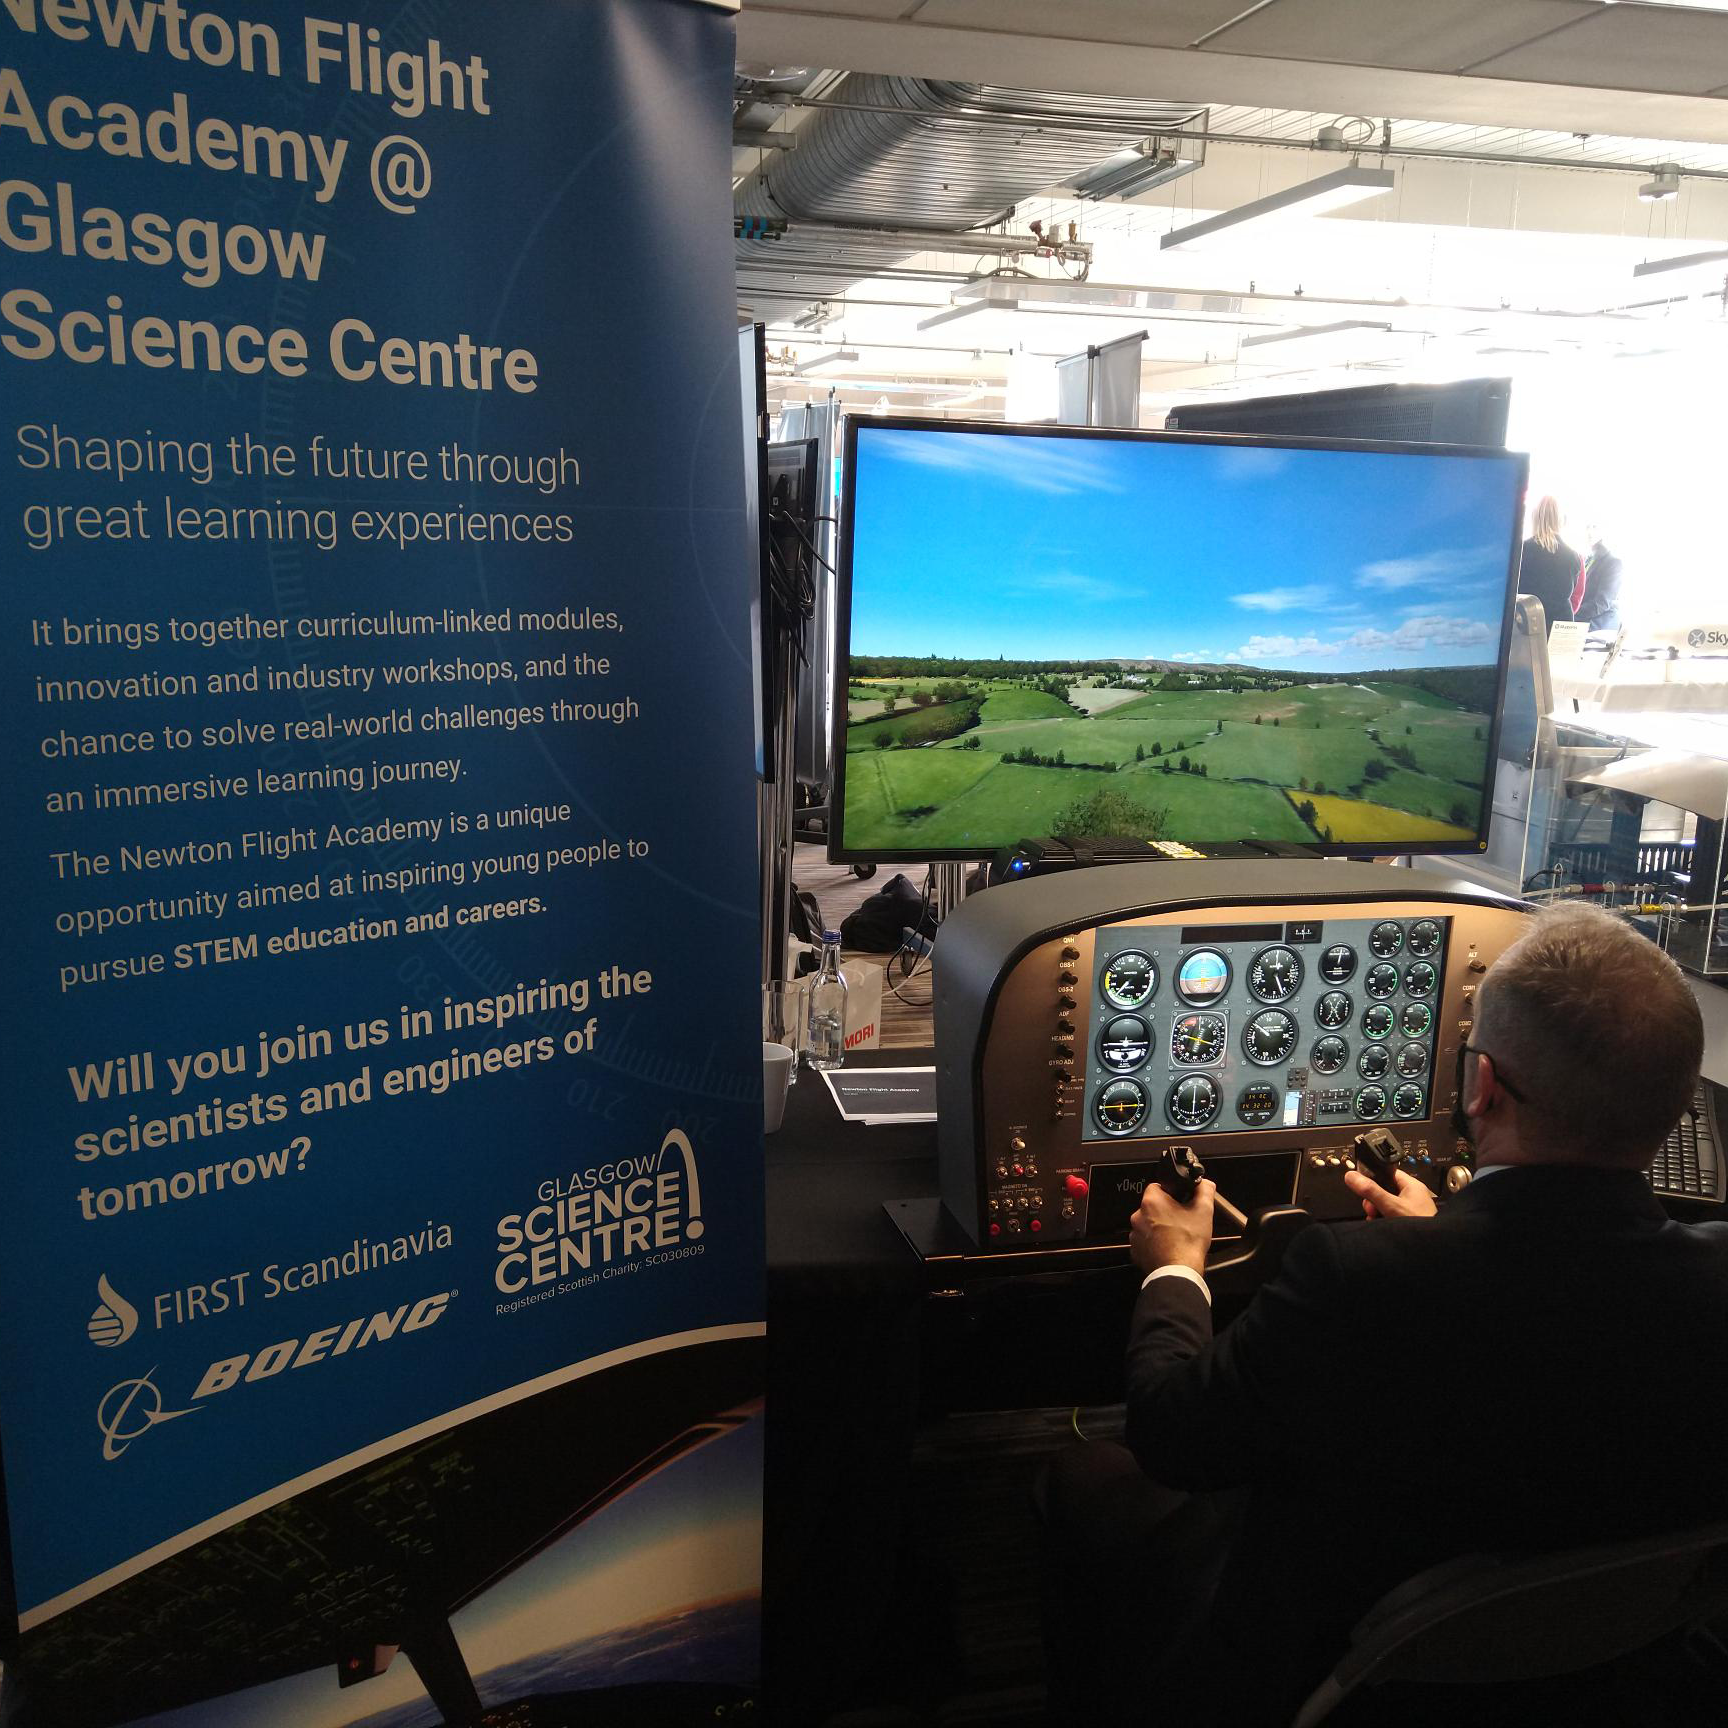 CEO, Stephen Breslin tries out a flight simulator experience at the launch of the Glasgow Newton Flight academy